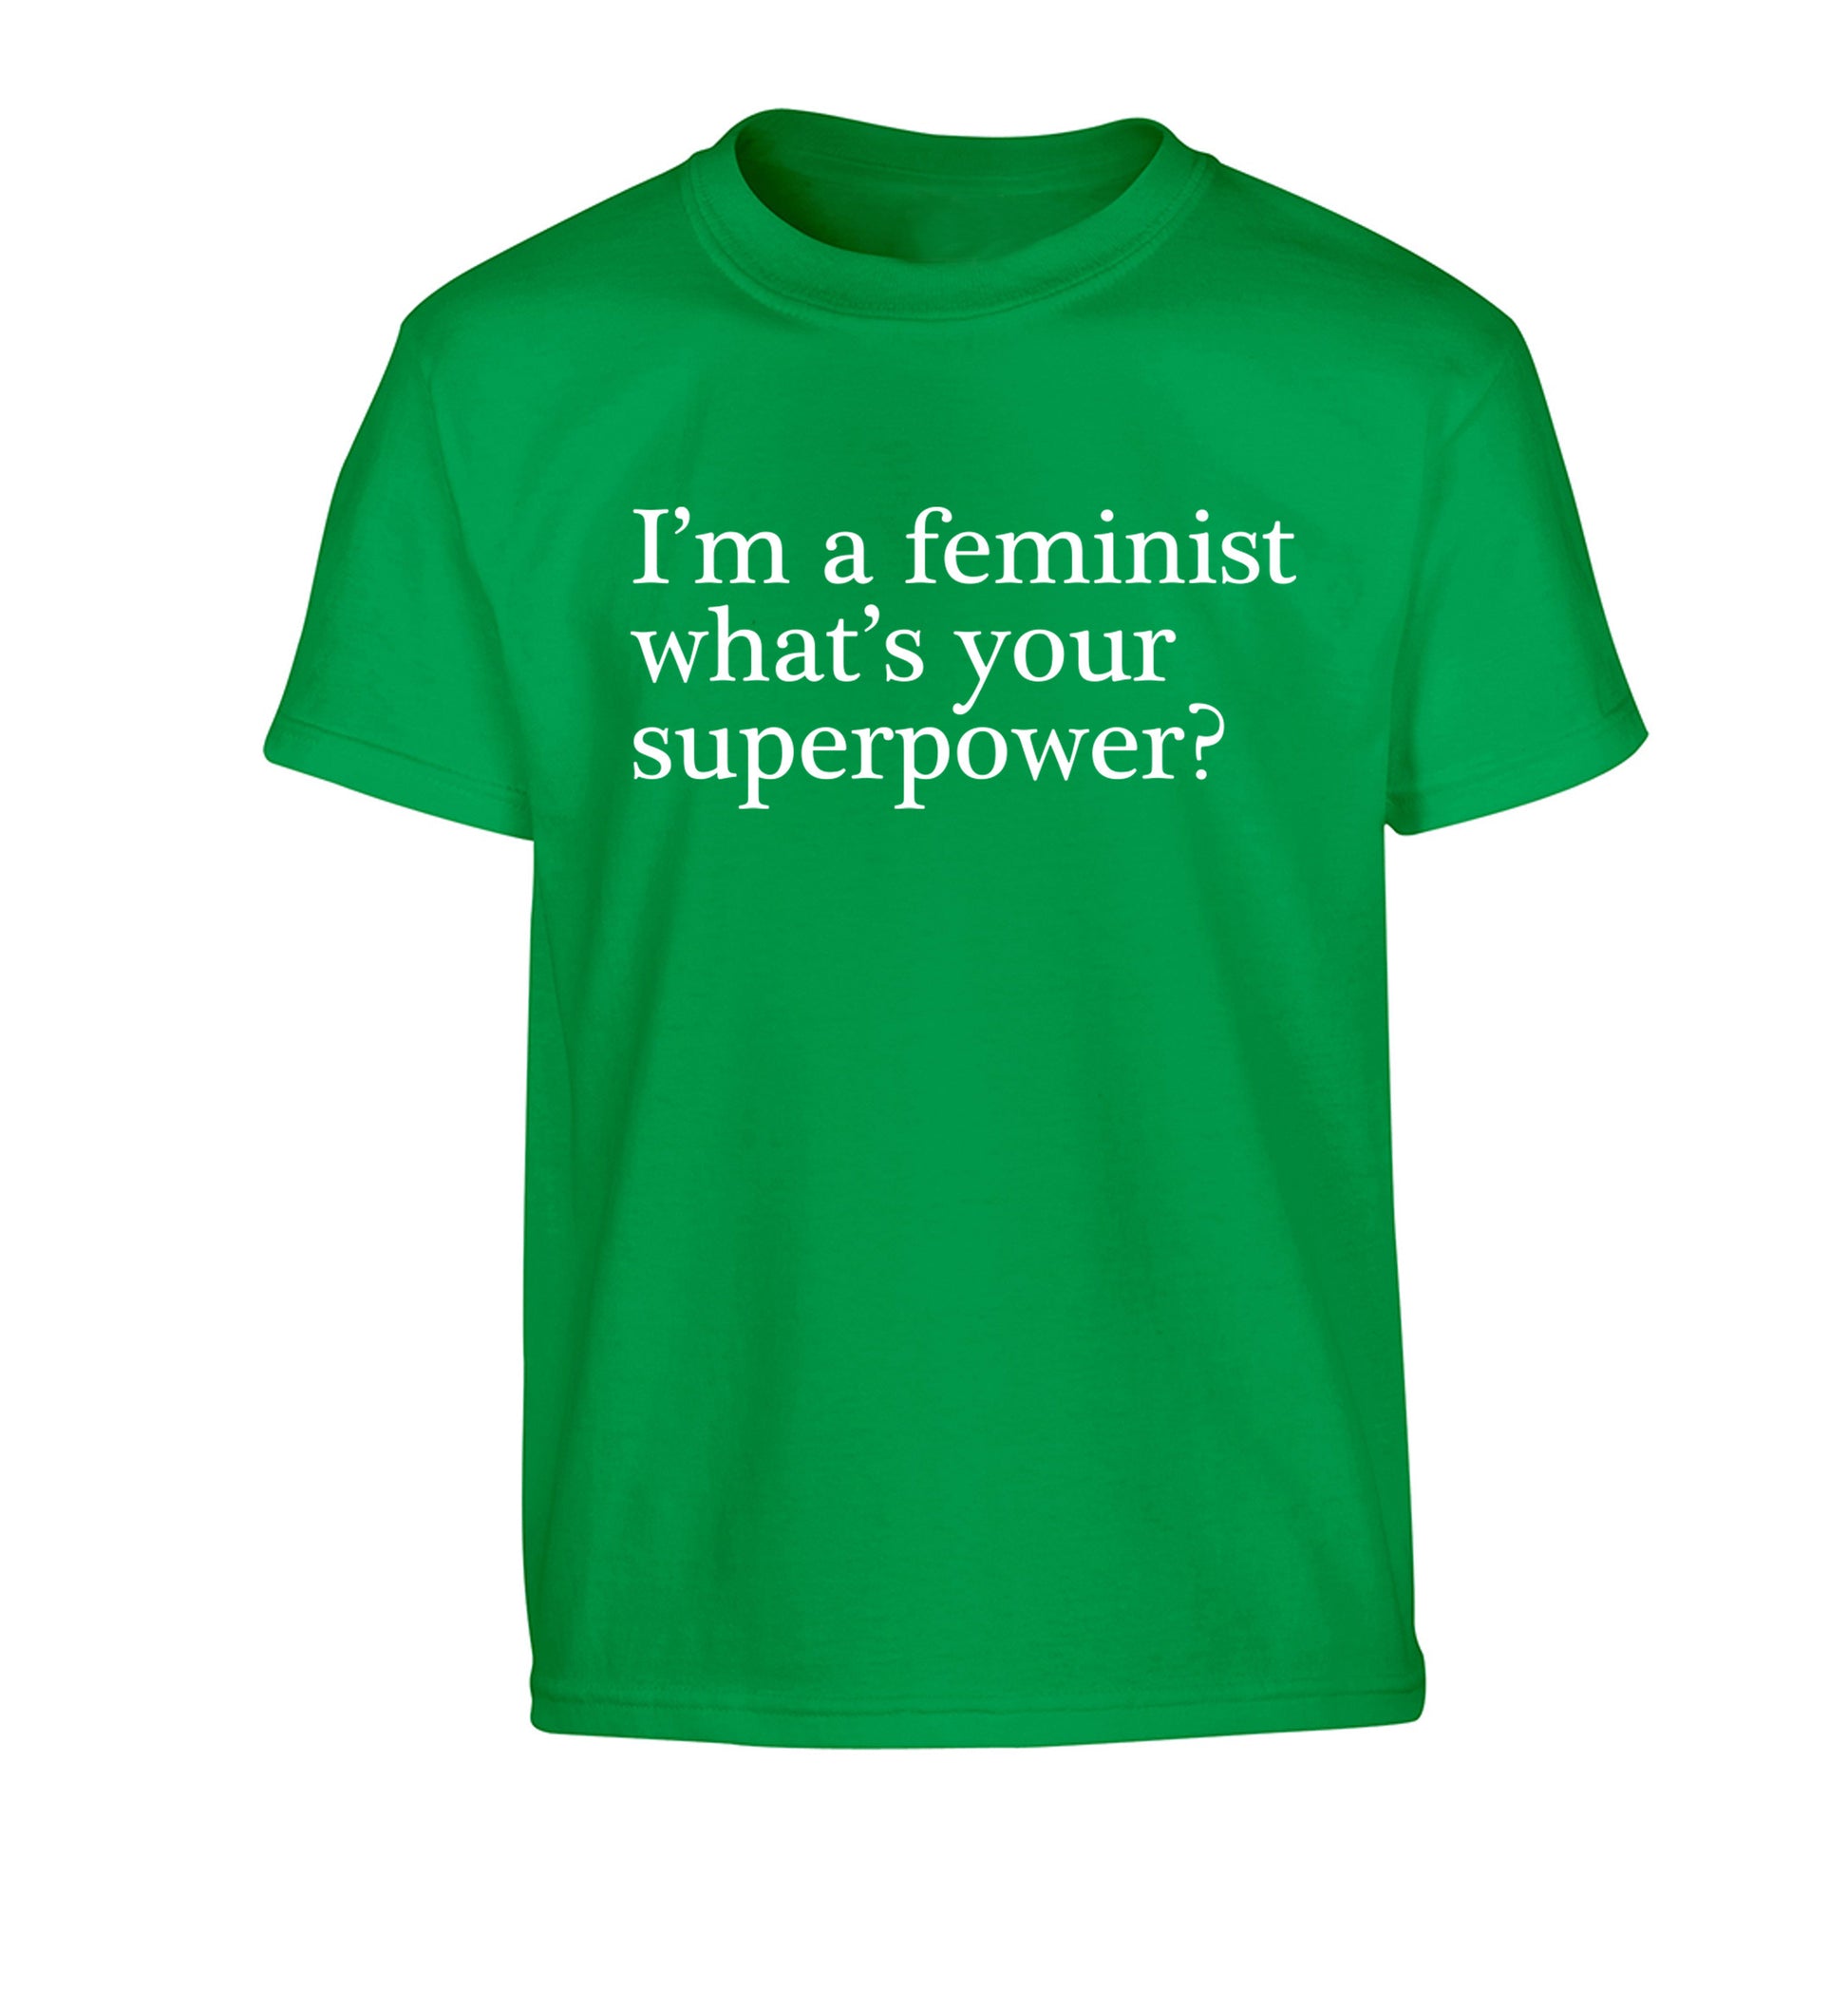 I'm a feminist what's your superpower? Children's green Tshirt 12-14 Years